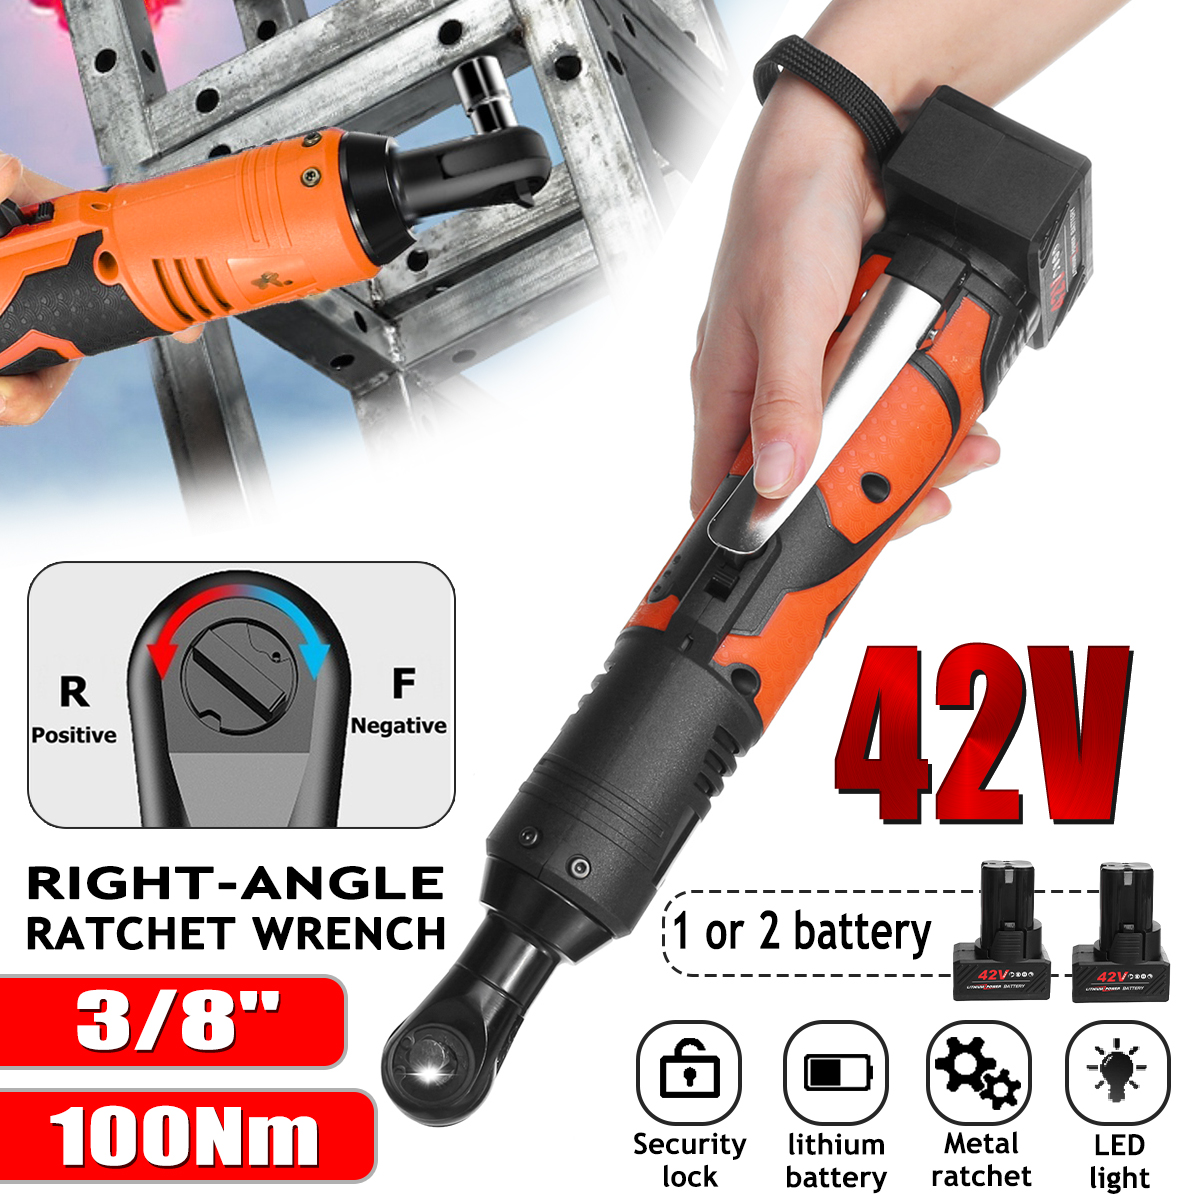 42V-100Nm-Cordless-Electric-Wrench-38-Ratchet-Wrench-Set-Angle-Drill-Screwdriver-LED-Light-1635604-1